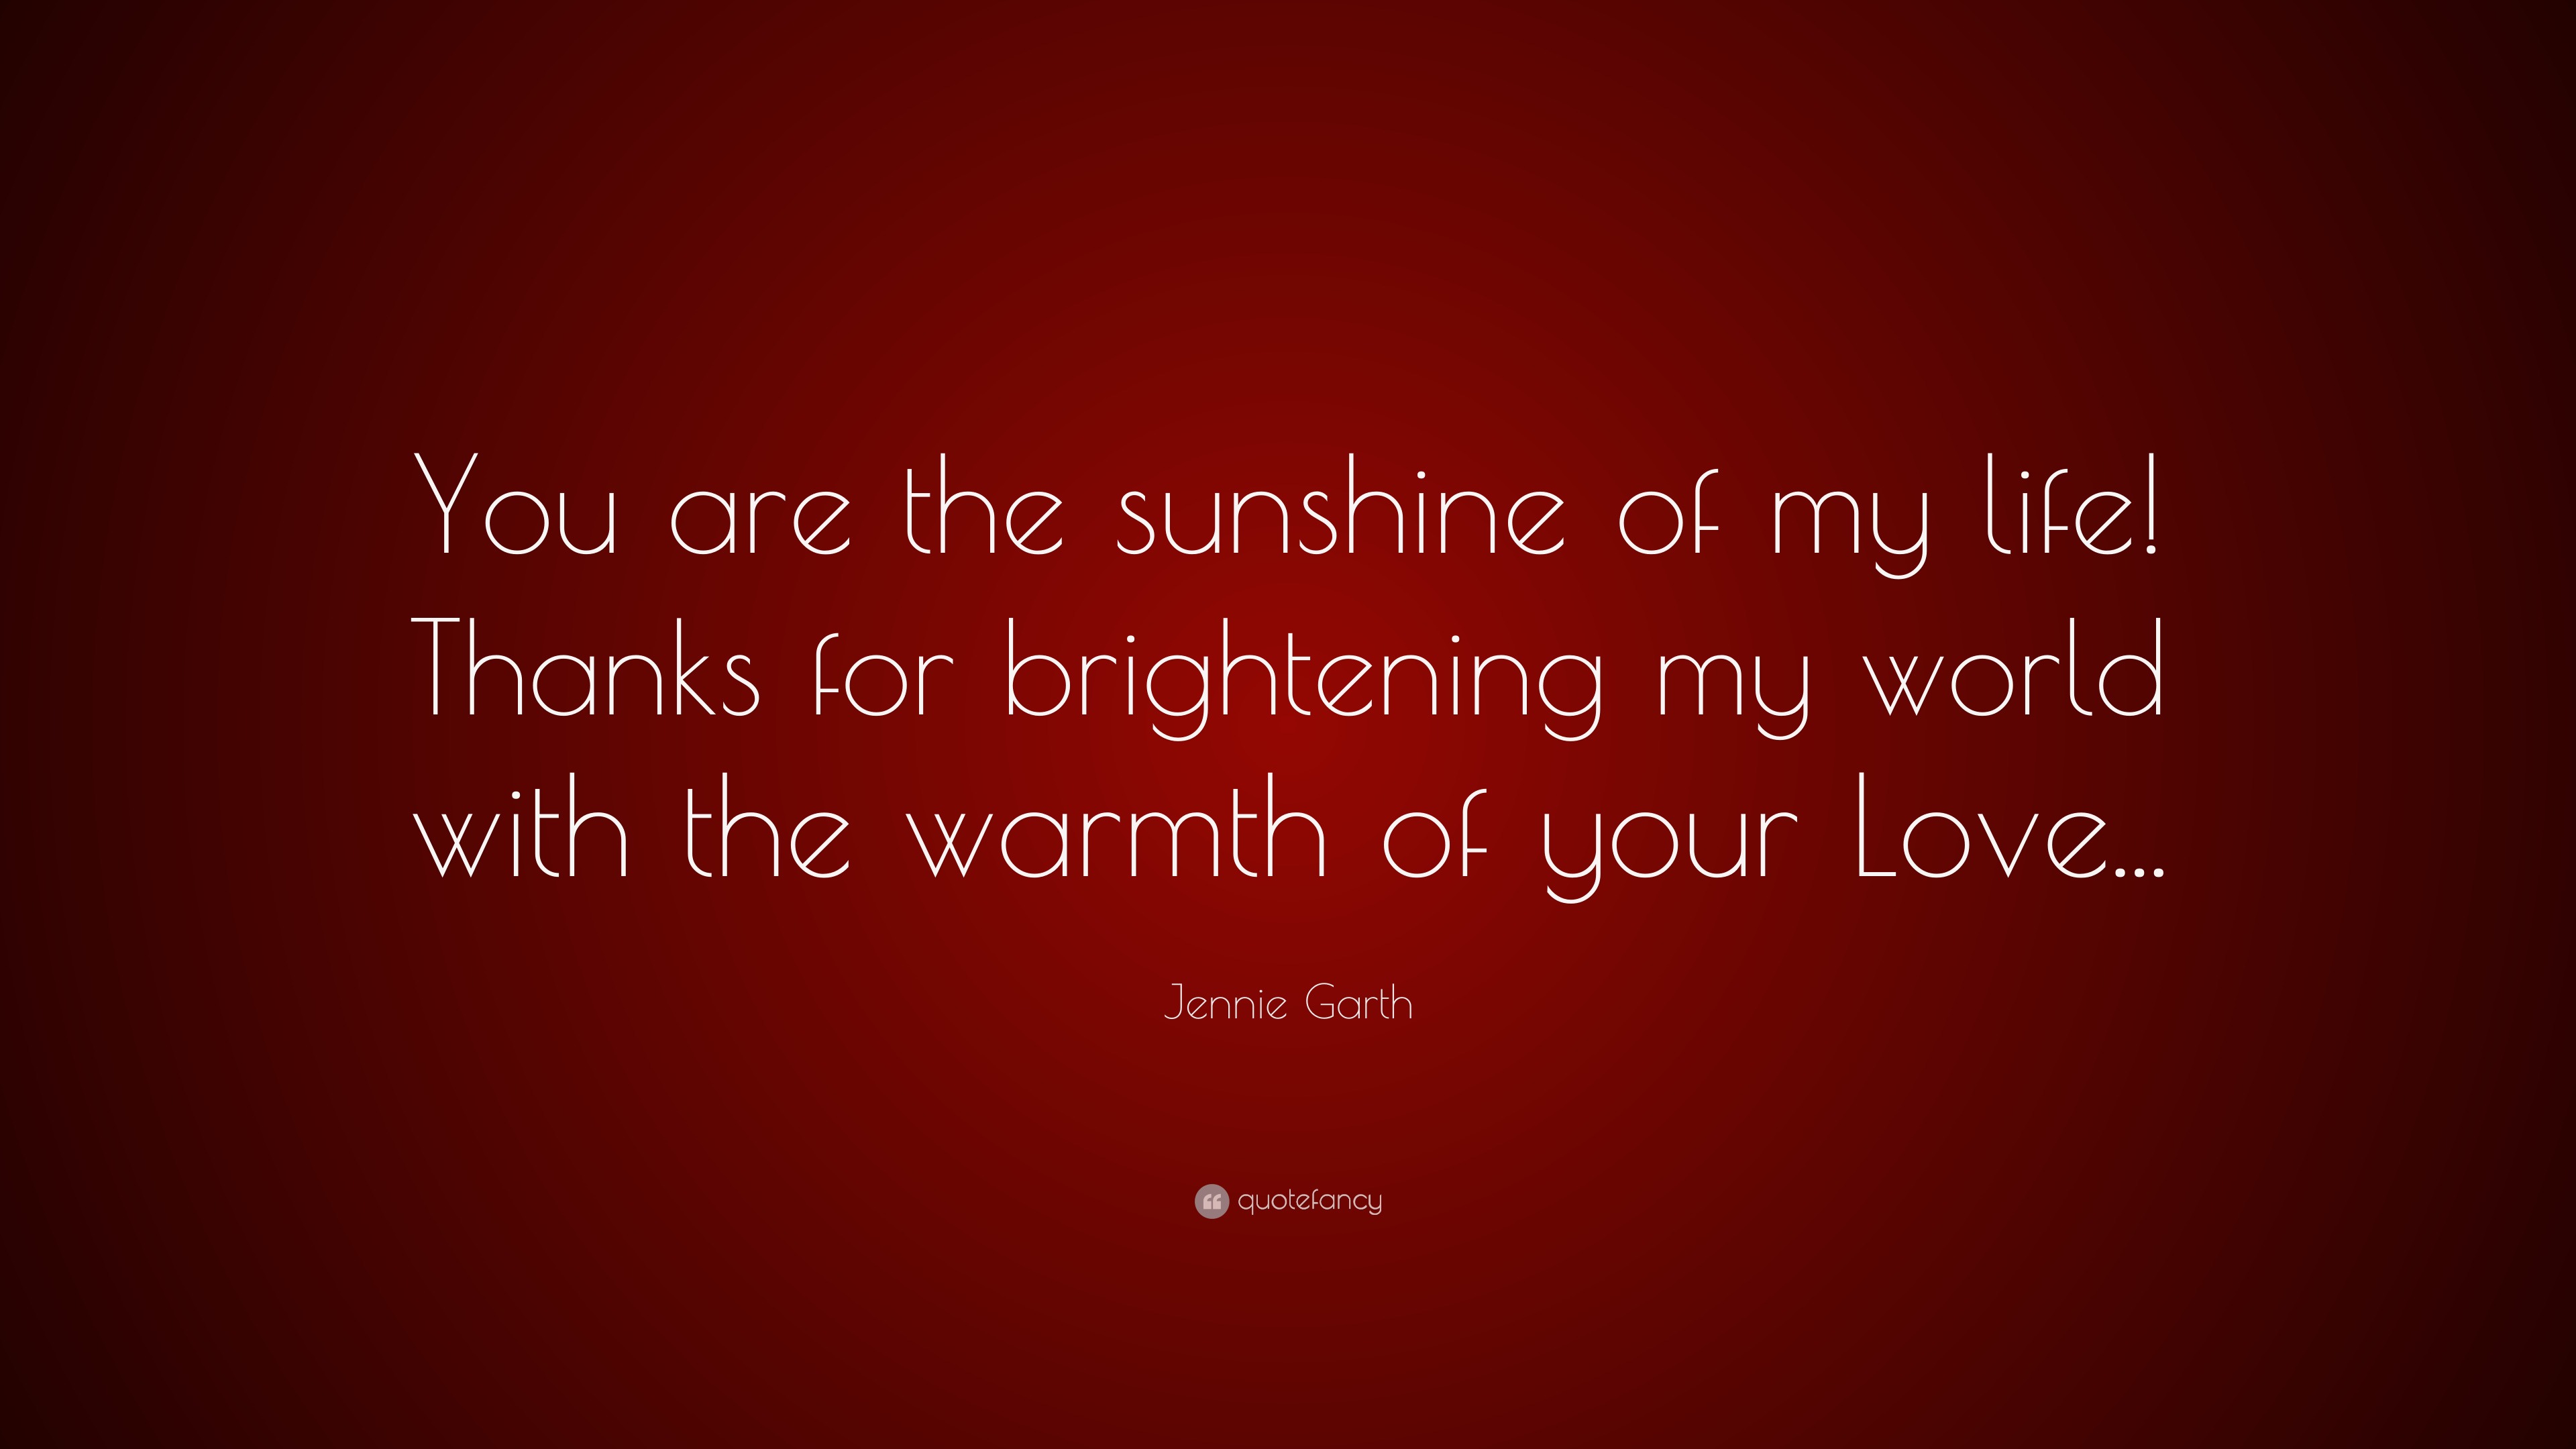 Jennie Garth Quote You Are The Sunshine Of My Life Thanks For Brightening My World With